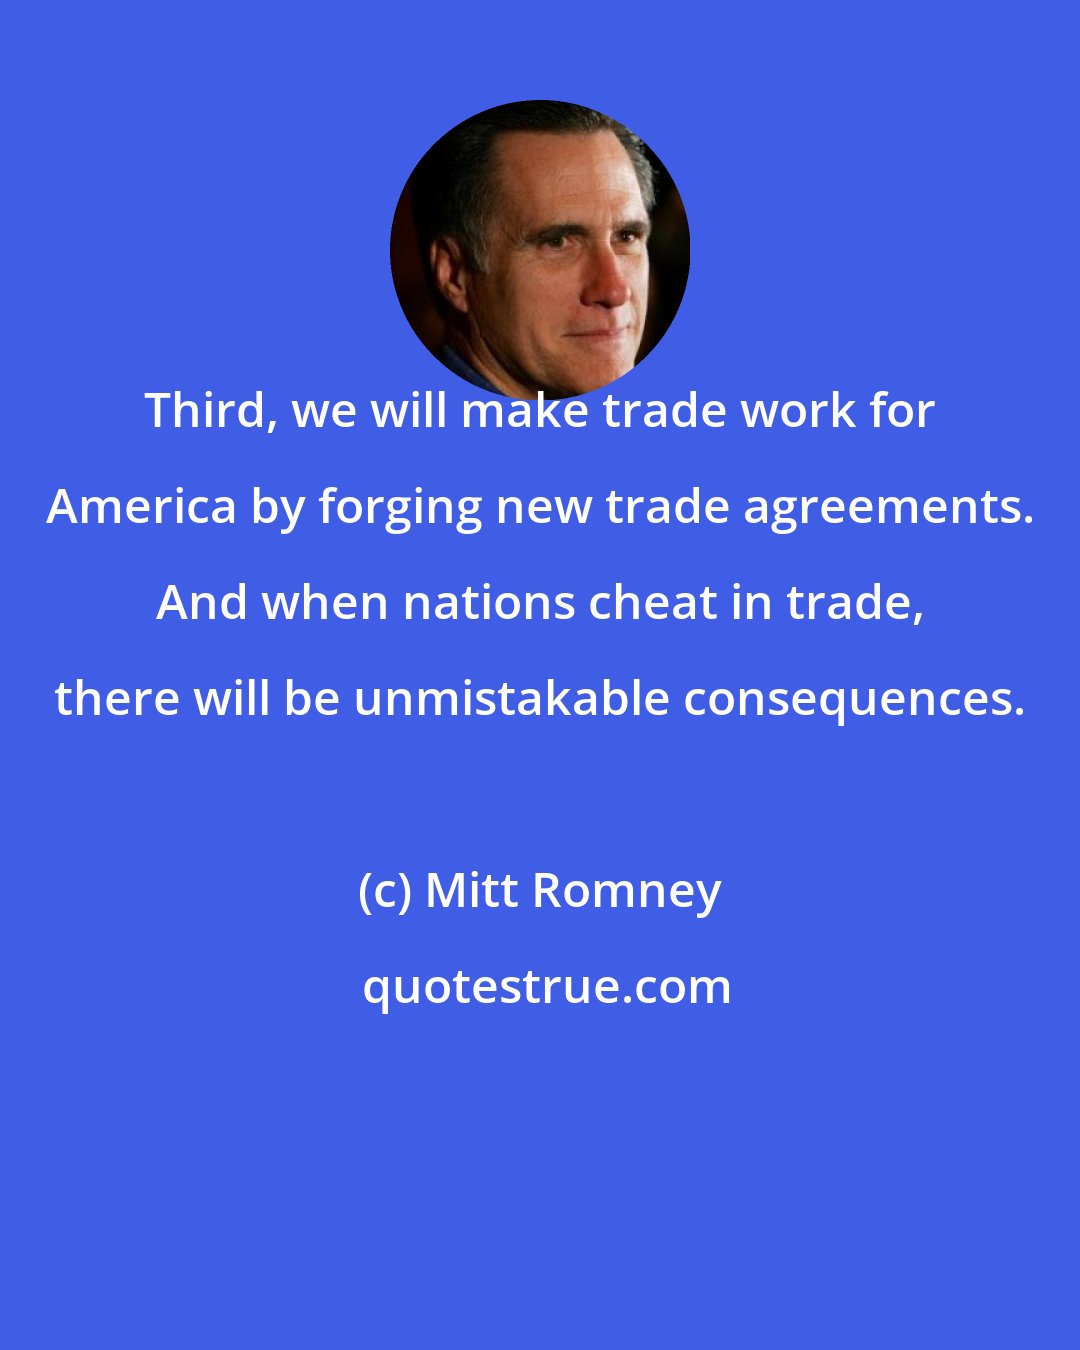 Mitt Romney: Third, we will make trade work for America by forging new trade agreements. And when nations cheat in trade, there will be unmistakable consequences.